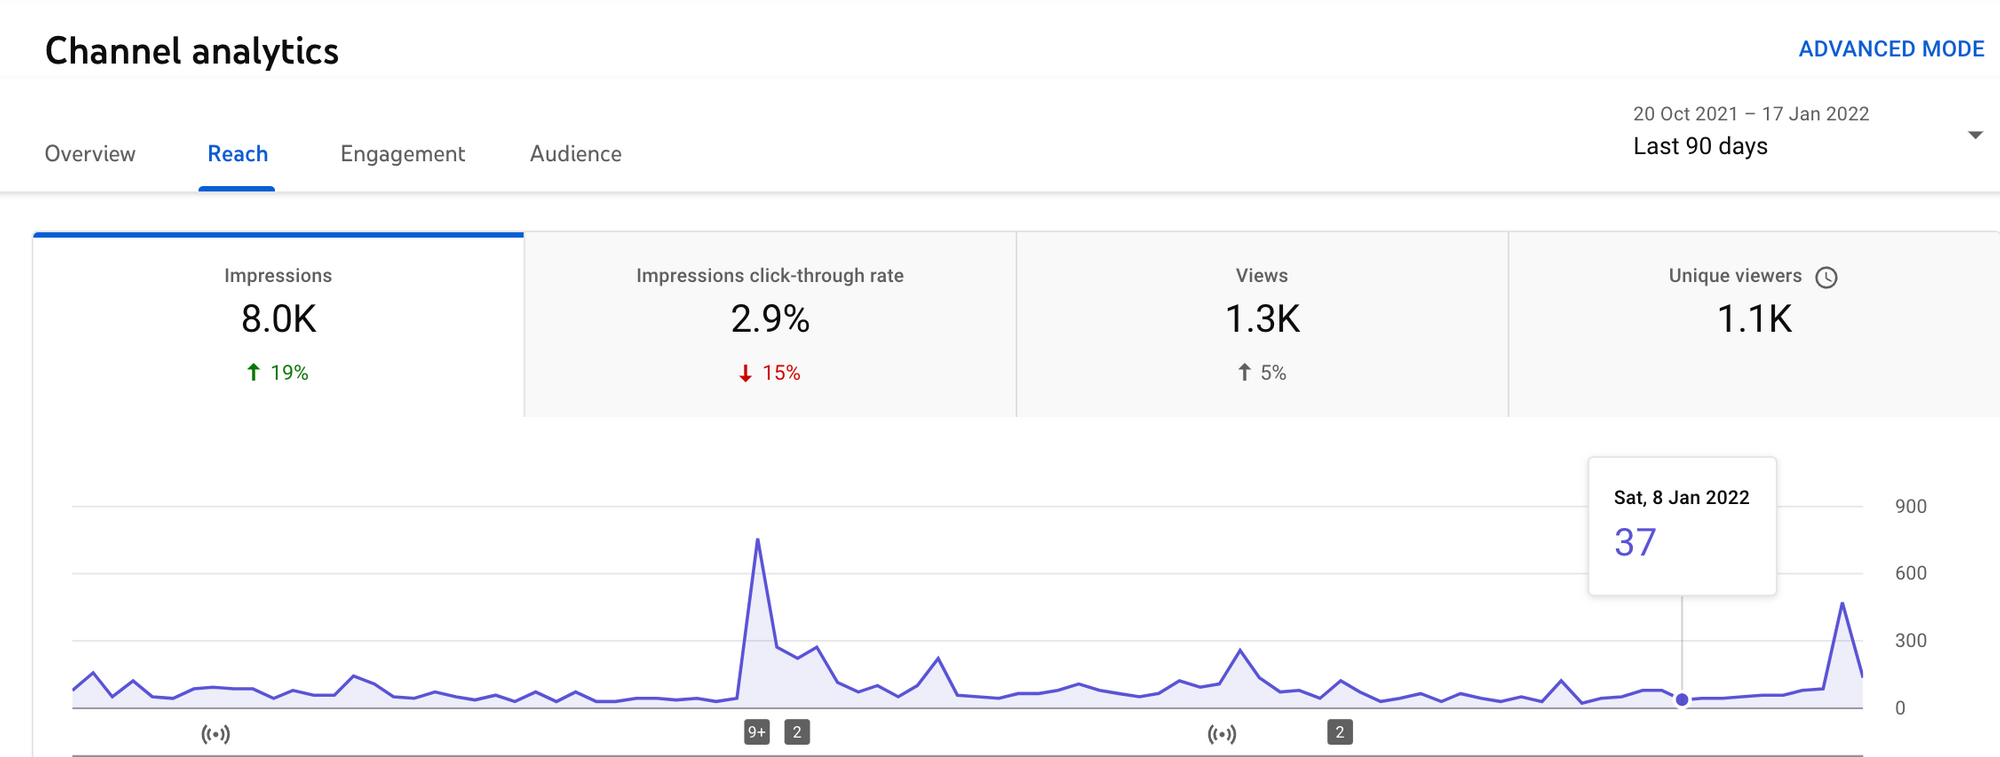 Here you can see how the YouTube analytics reach report is displayed in the native app.